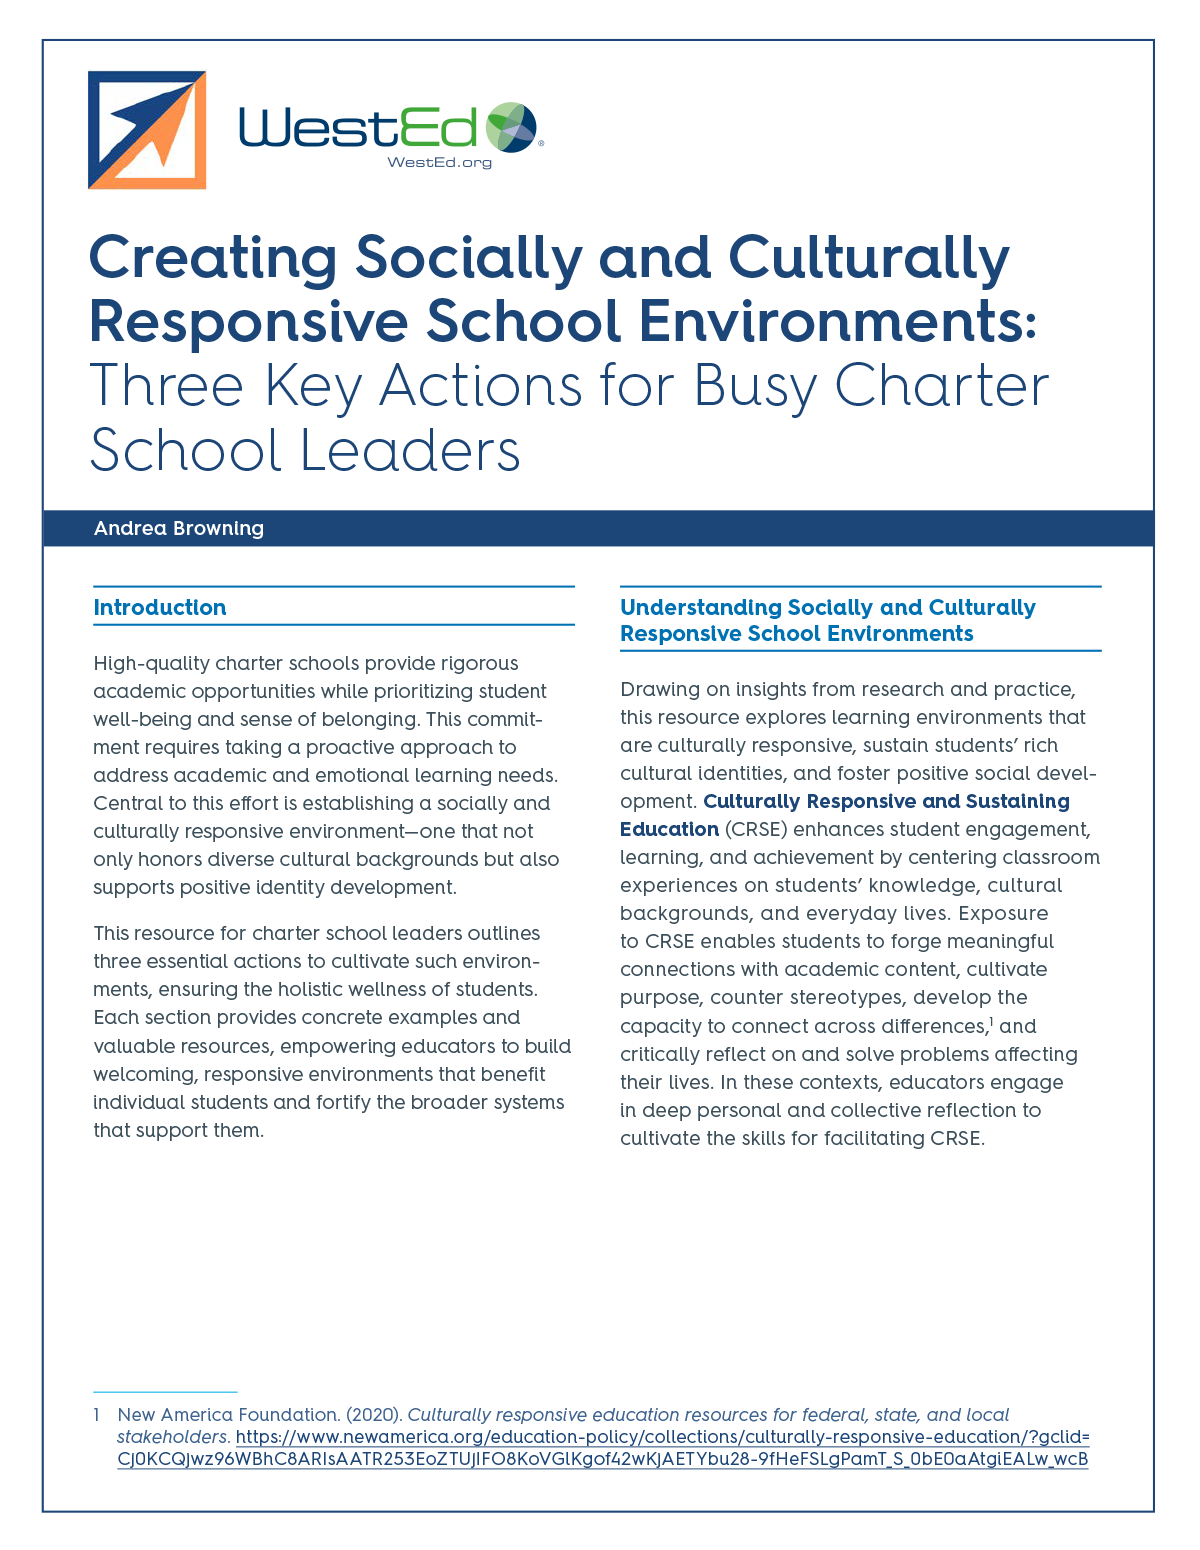 Creating Socially and Culturally Responsive School Environments: Three Key Actions for Busy Charter School Leaders